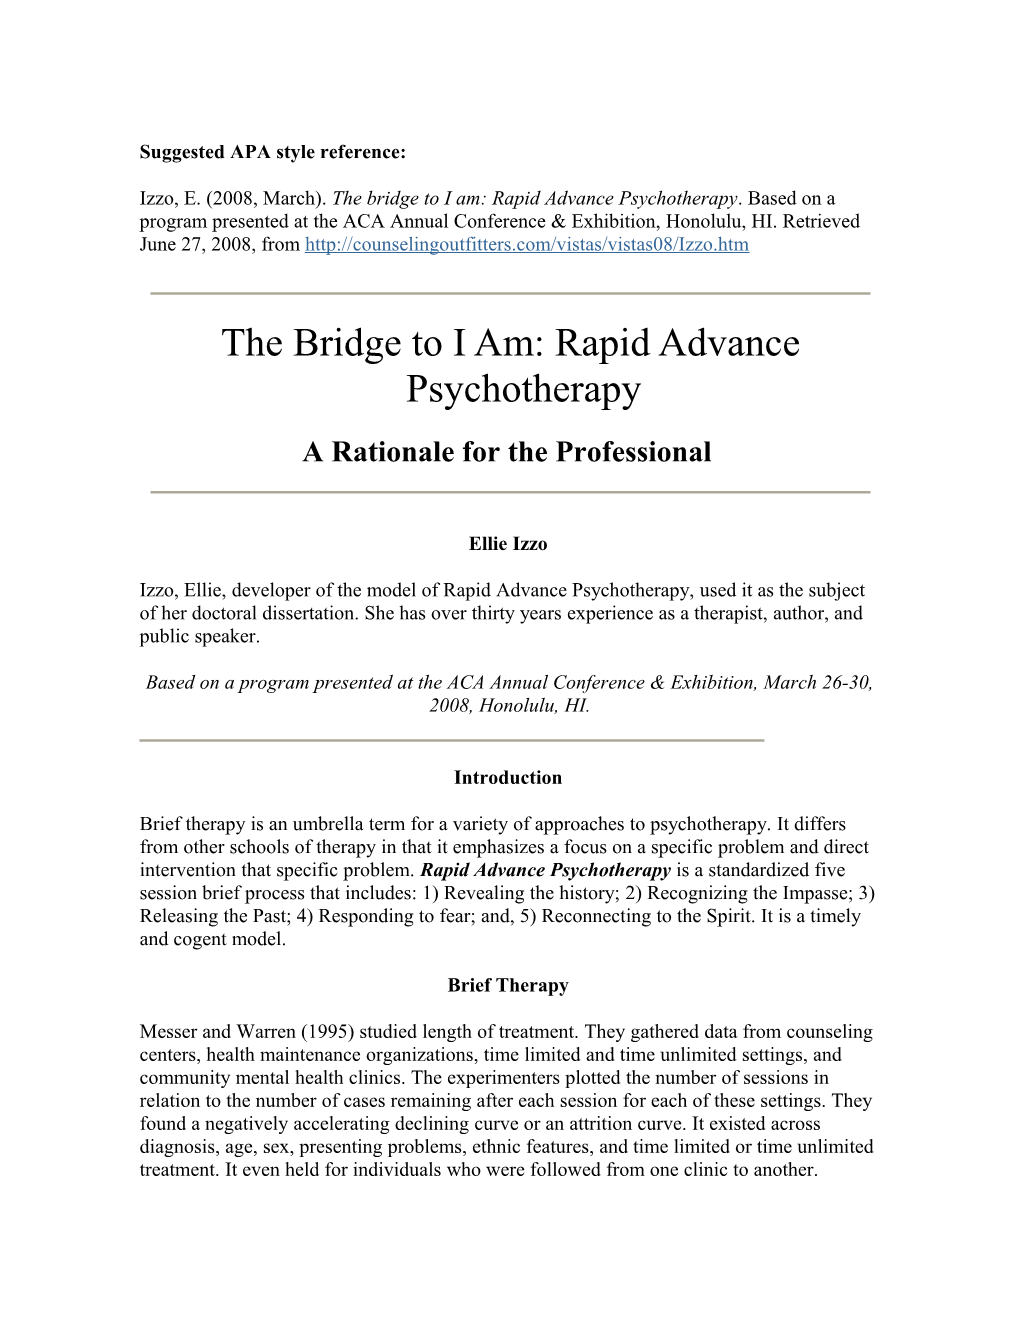 The Bridge to I Am: Rapid Advance Psychotherapy